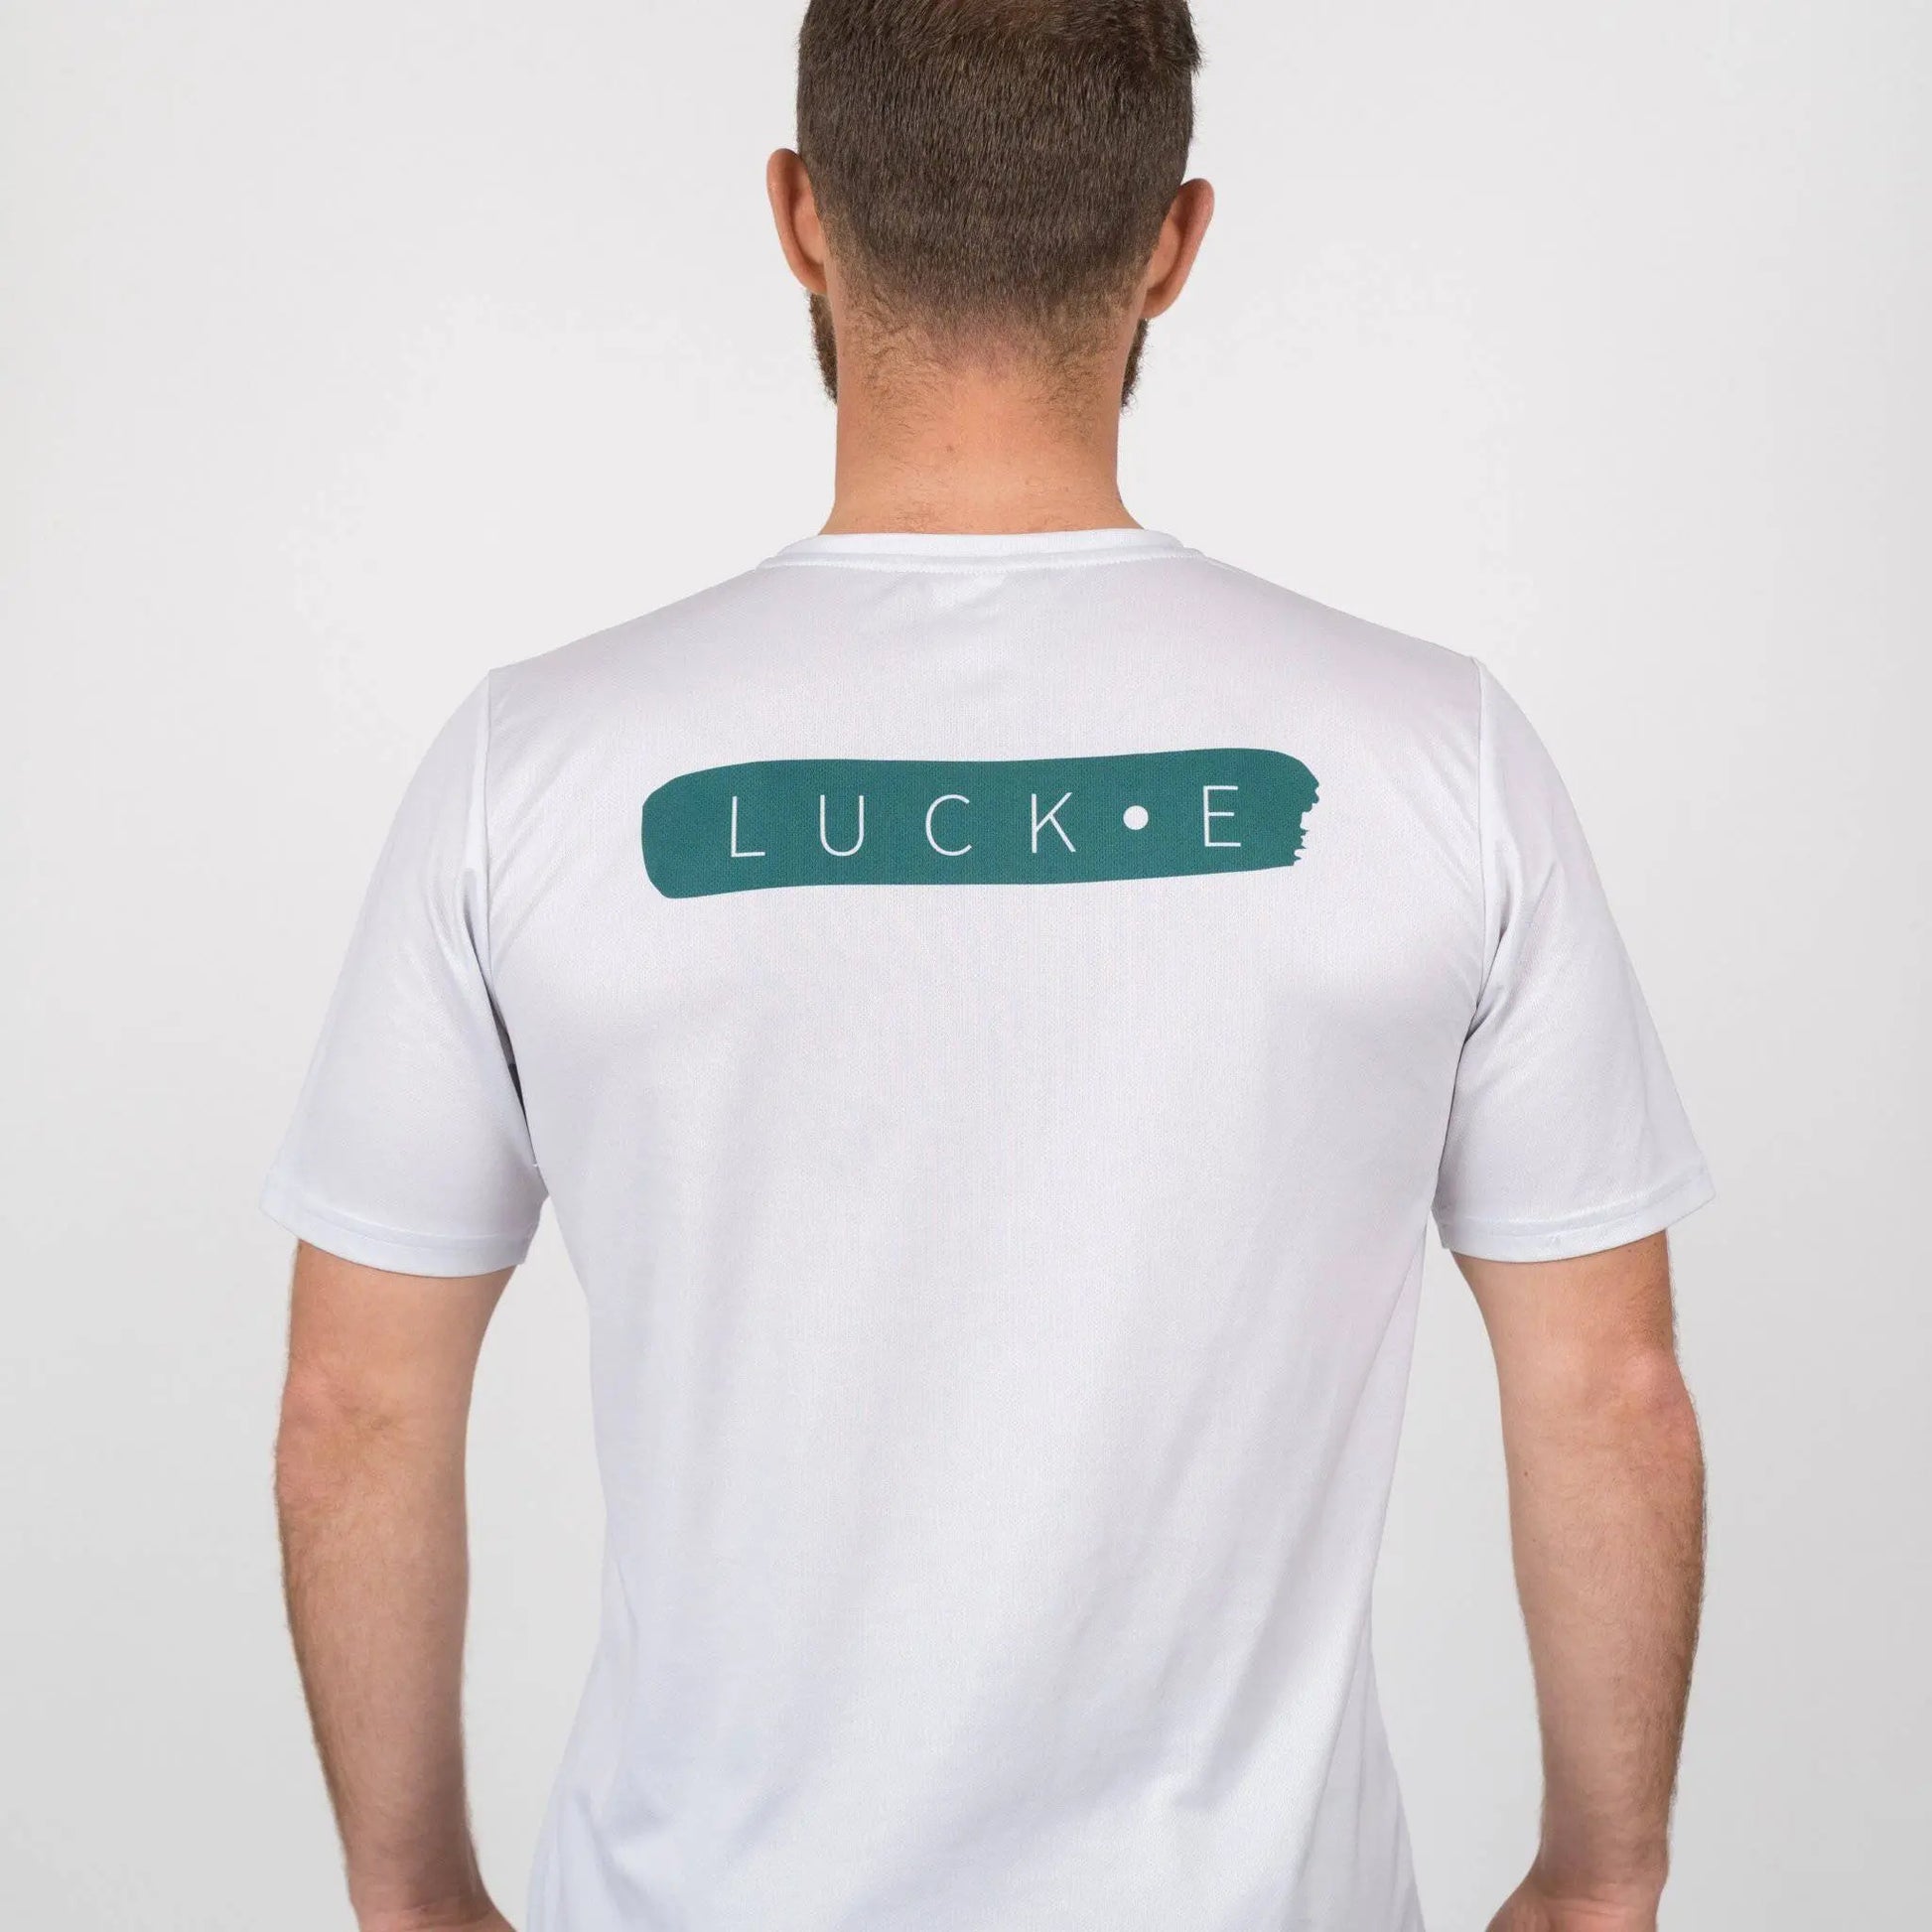 Men's Performance Tech Tee | Made From 100% Recycled Ocean Waste LUCKE NZ